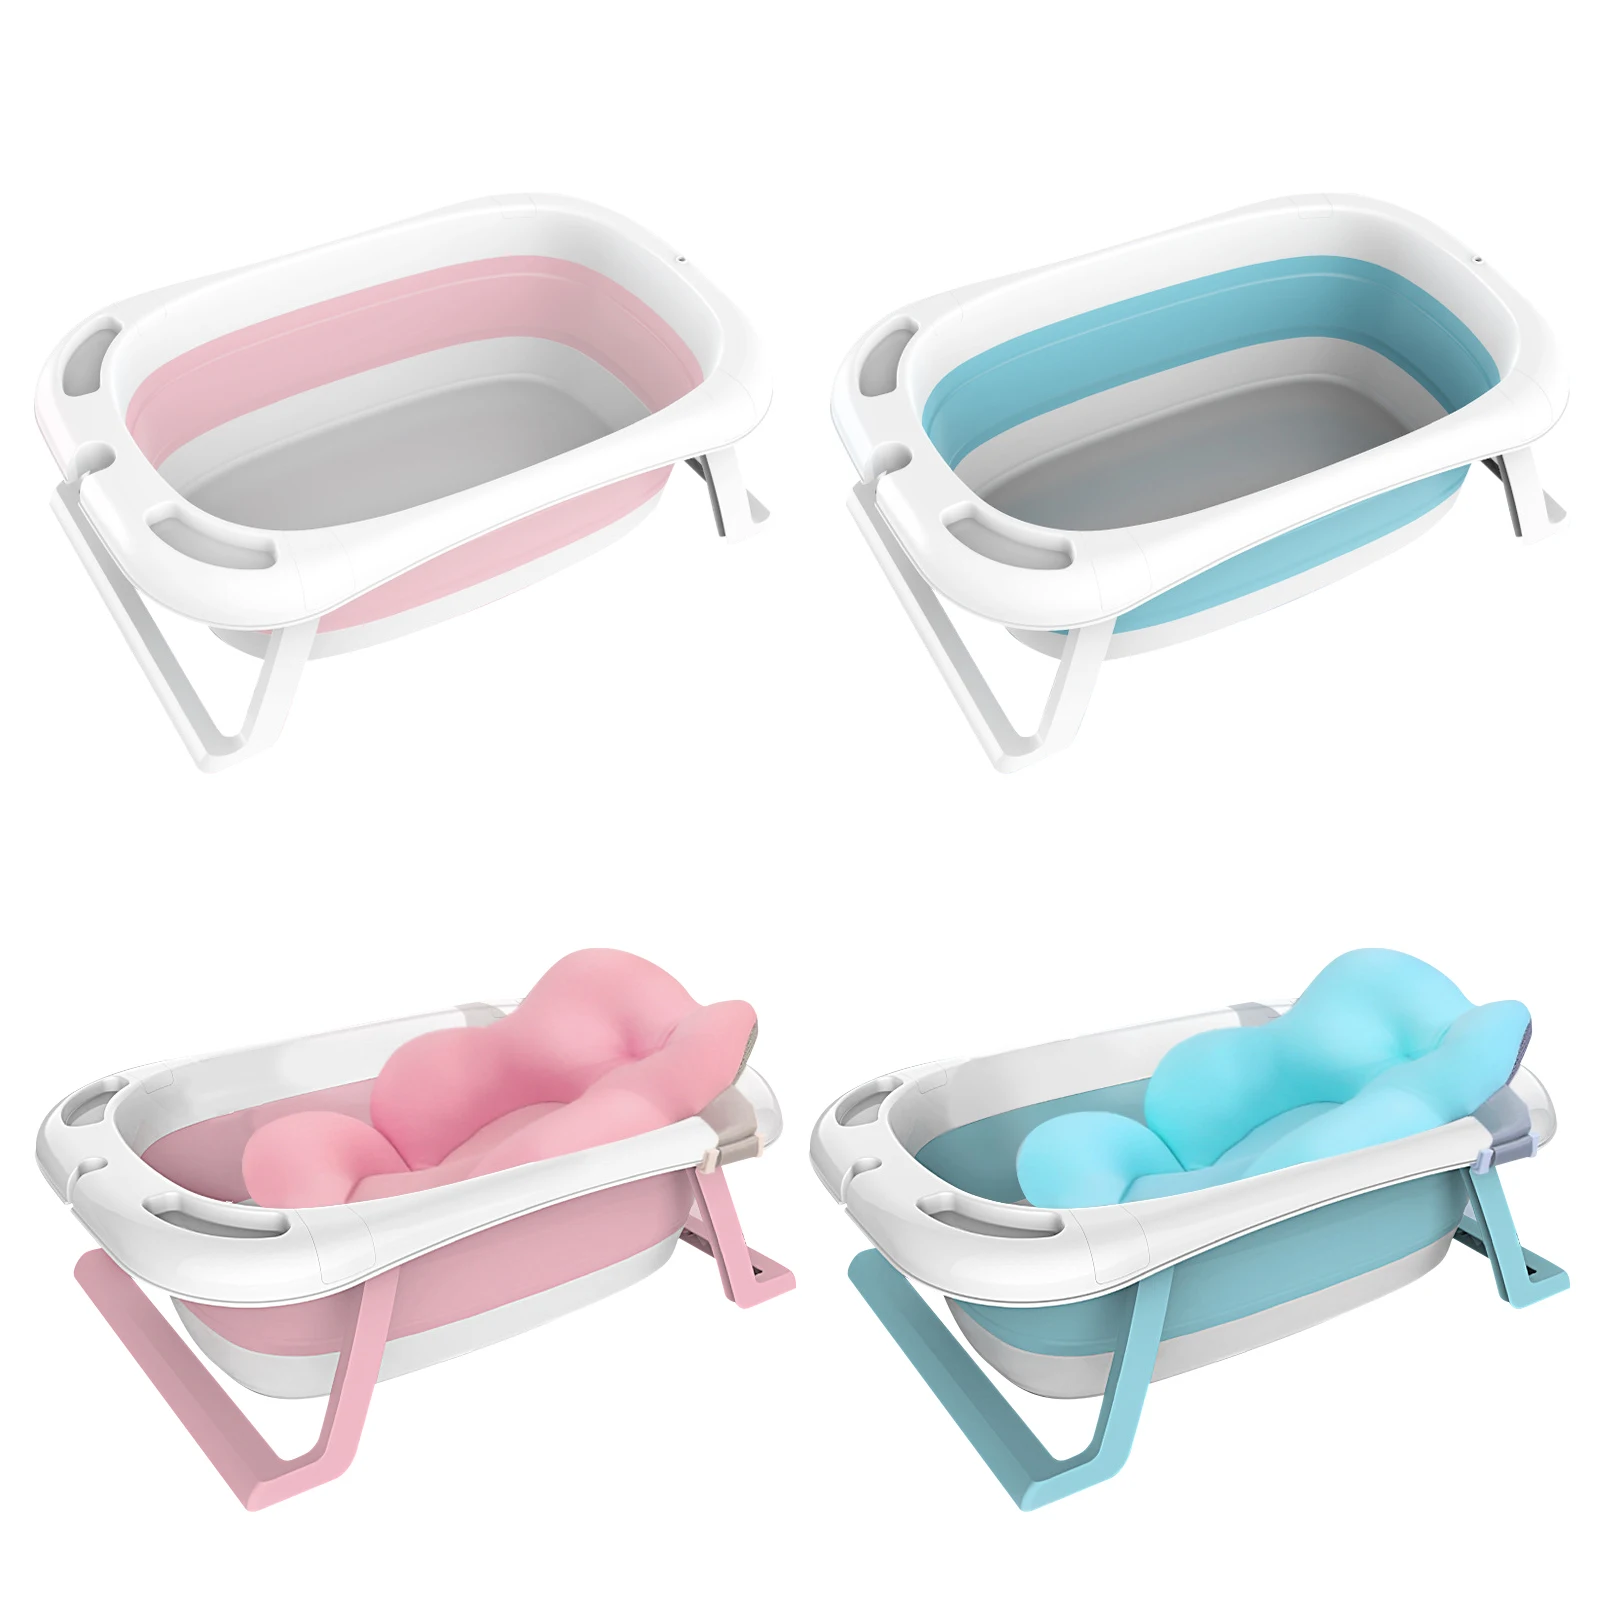 Baby Shower Foldable Bathtub 0-6 Years Newborn Bath Barrel Can Sit And Lie Washing Tubs With Smart Temperature Detection System